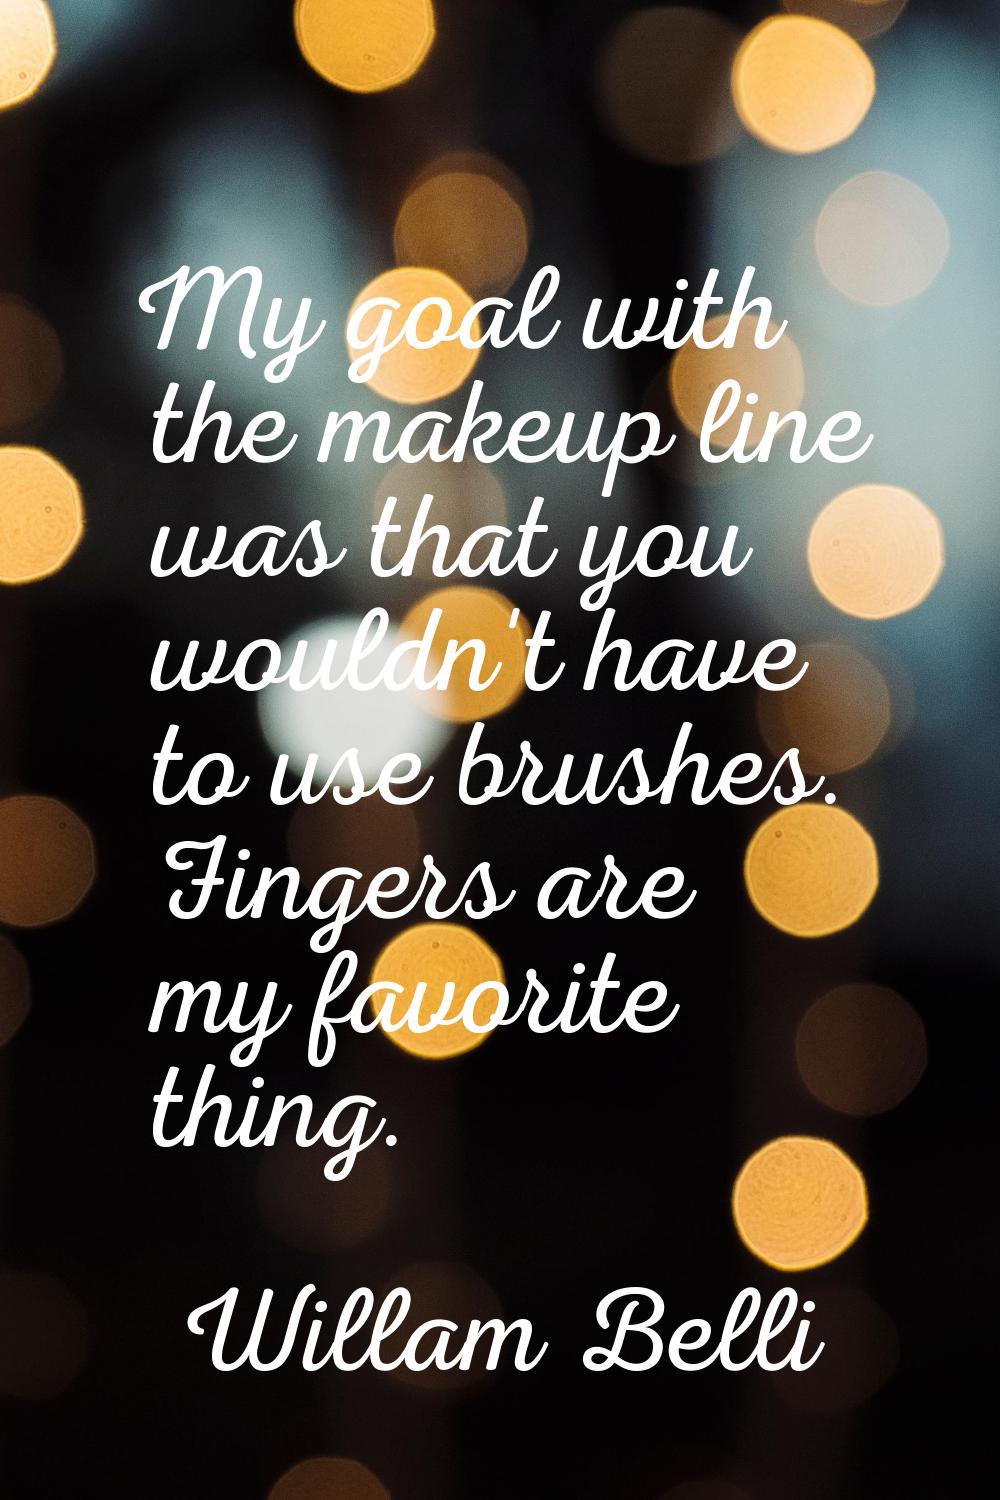 My goal with the makeup line was that you wouldn't have to use brushes. Fingers are my favorite thi